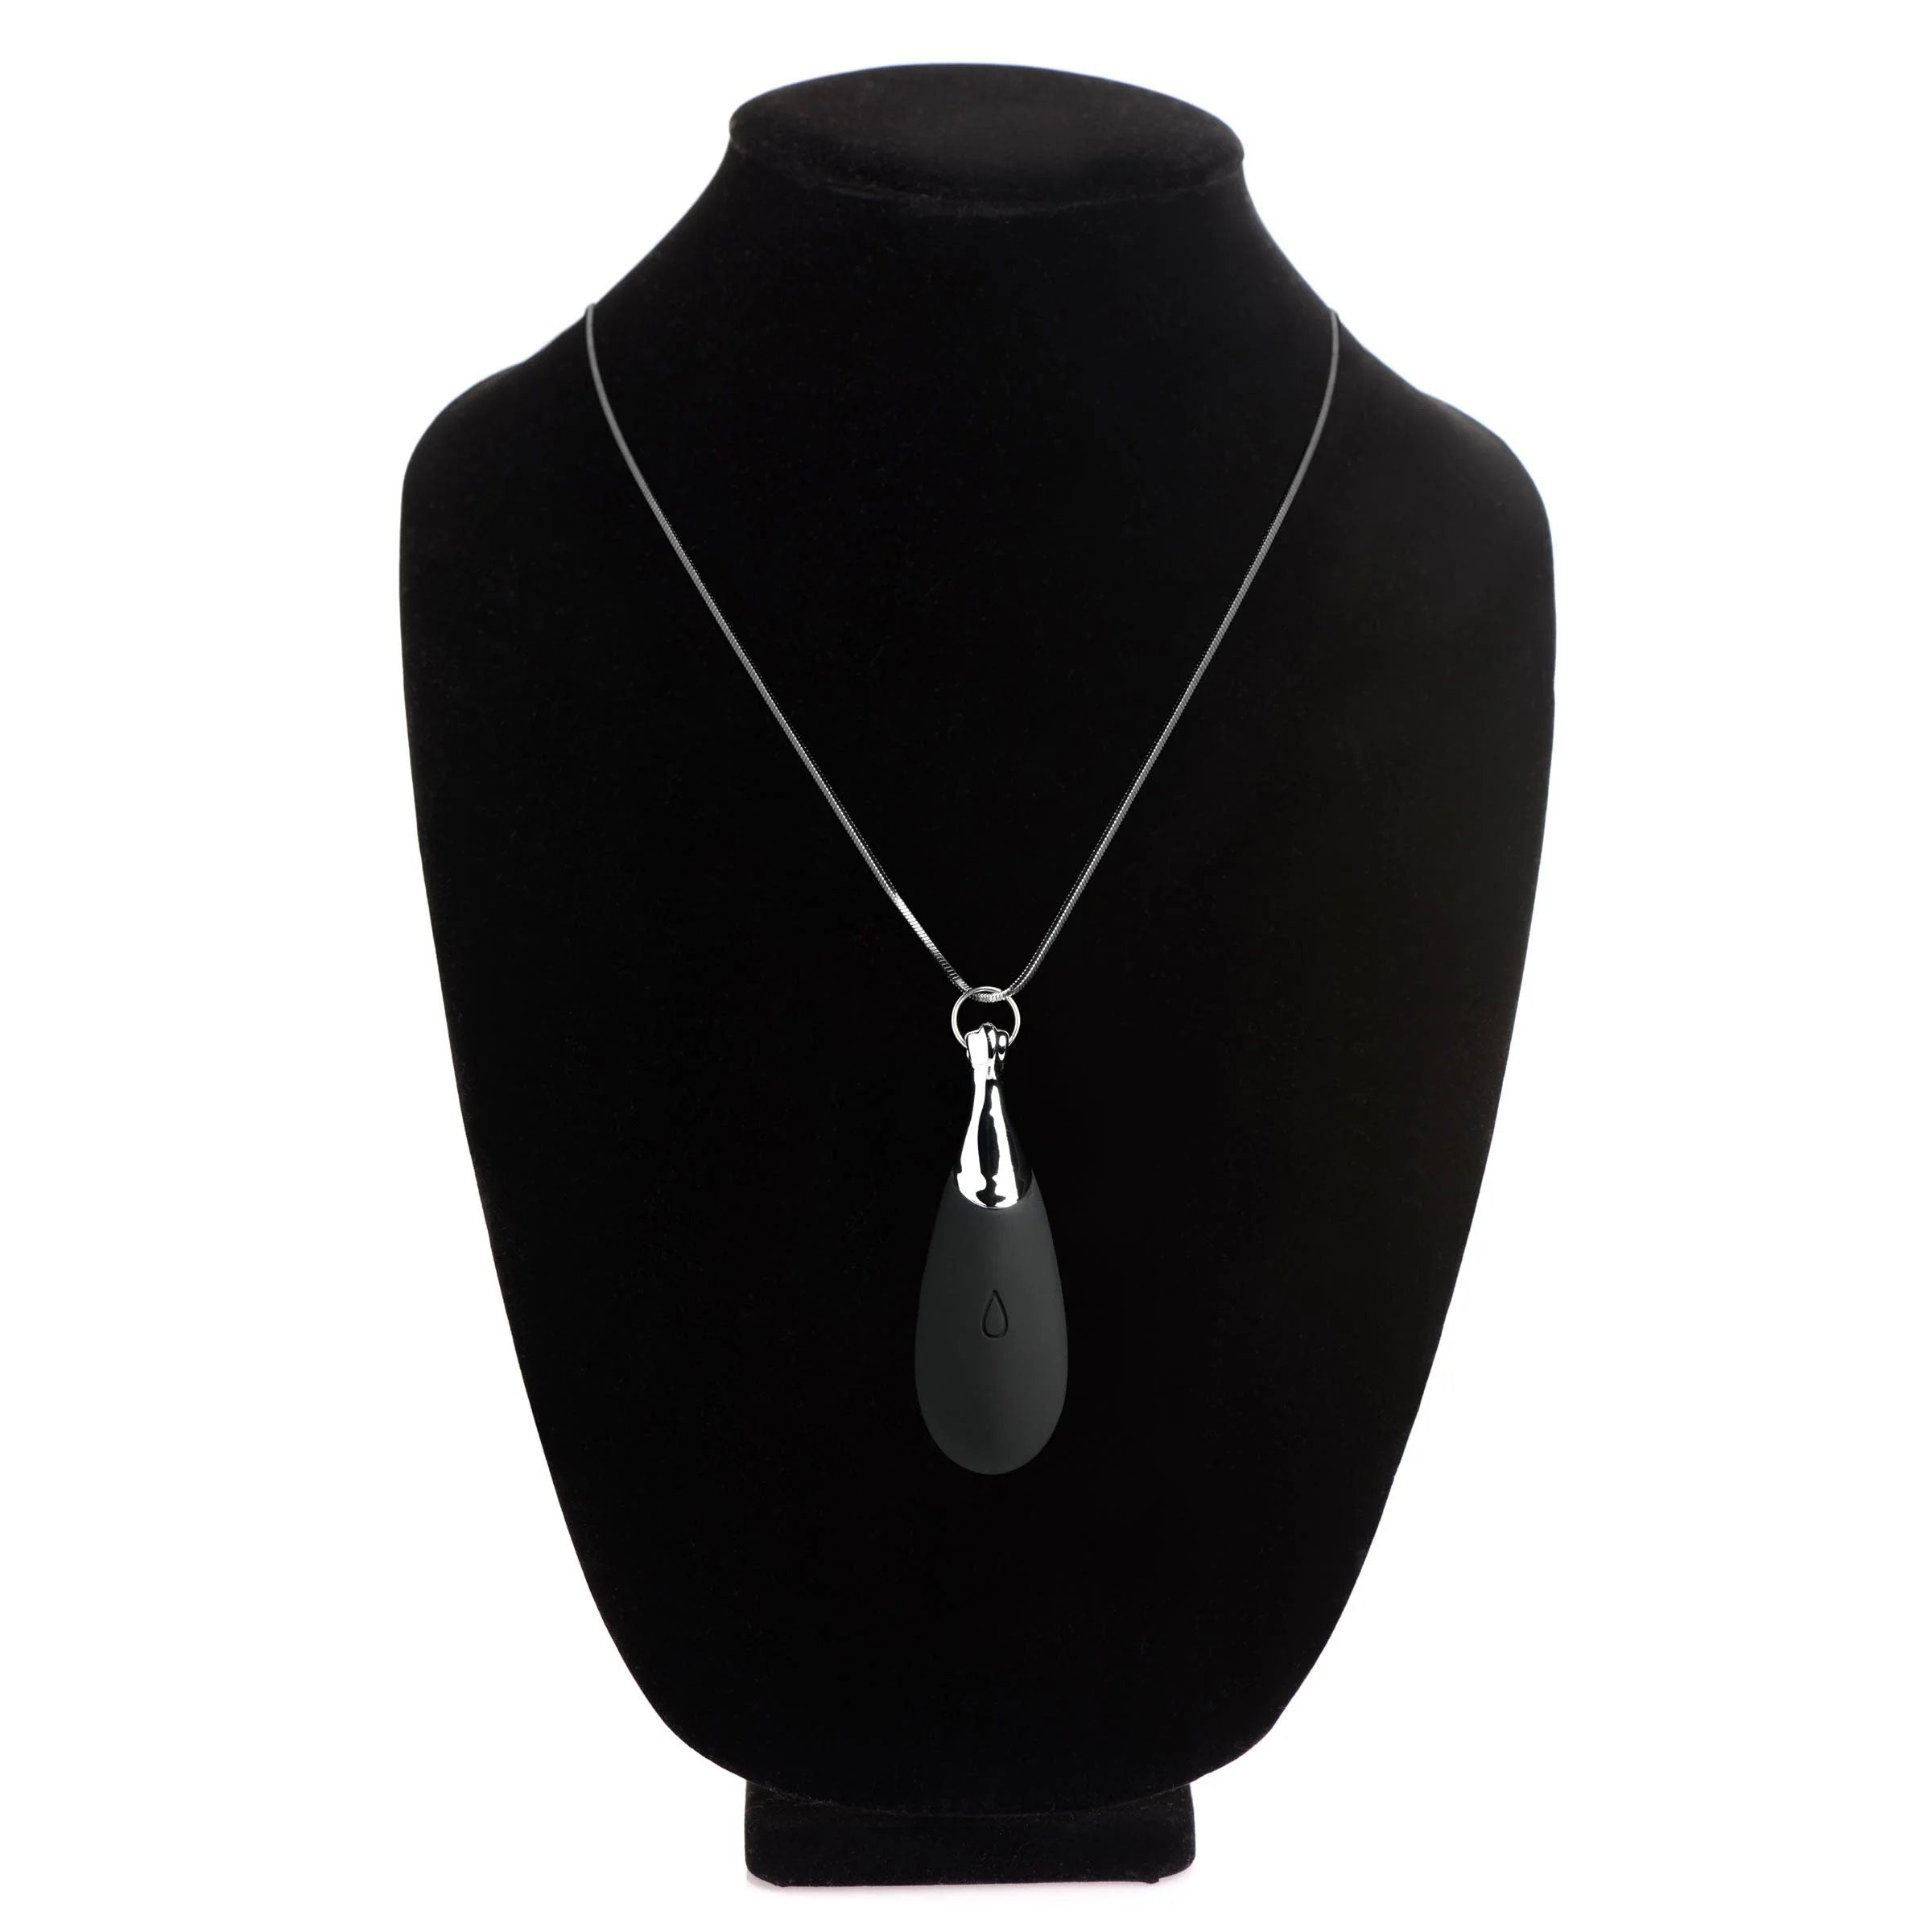 Charmed 10x Vibrating Silicone Teardrop Necklace